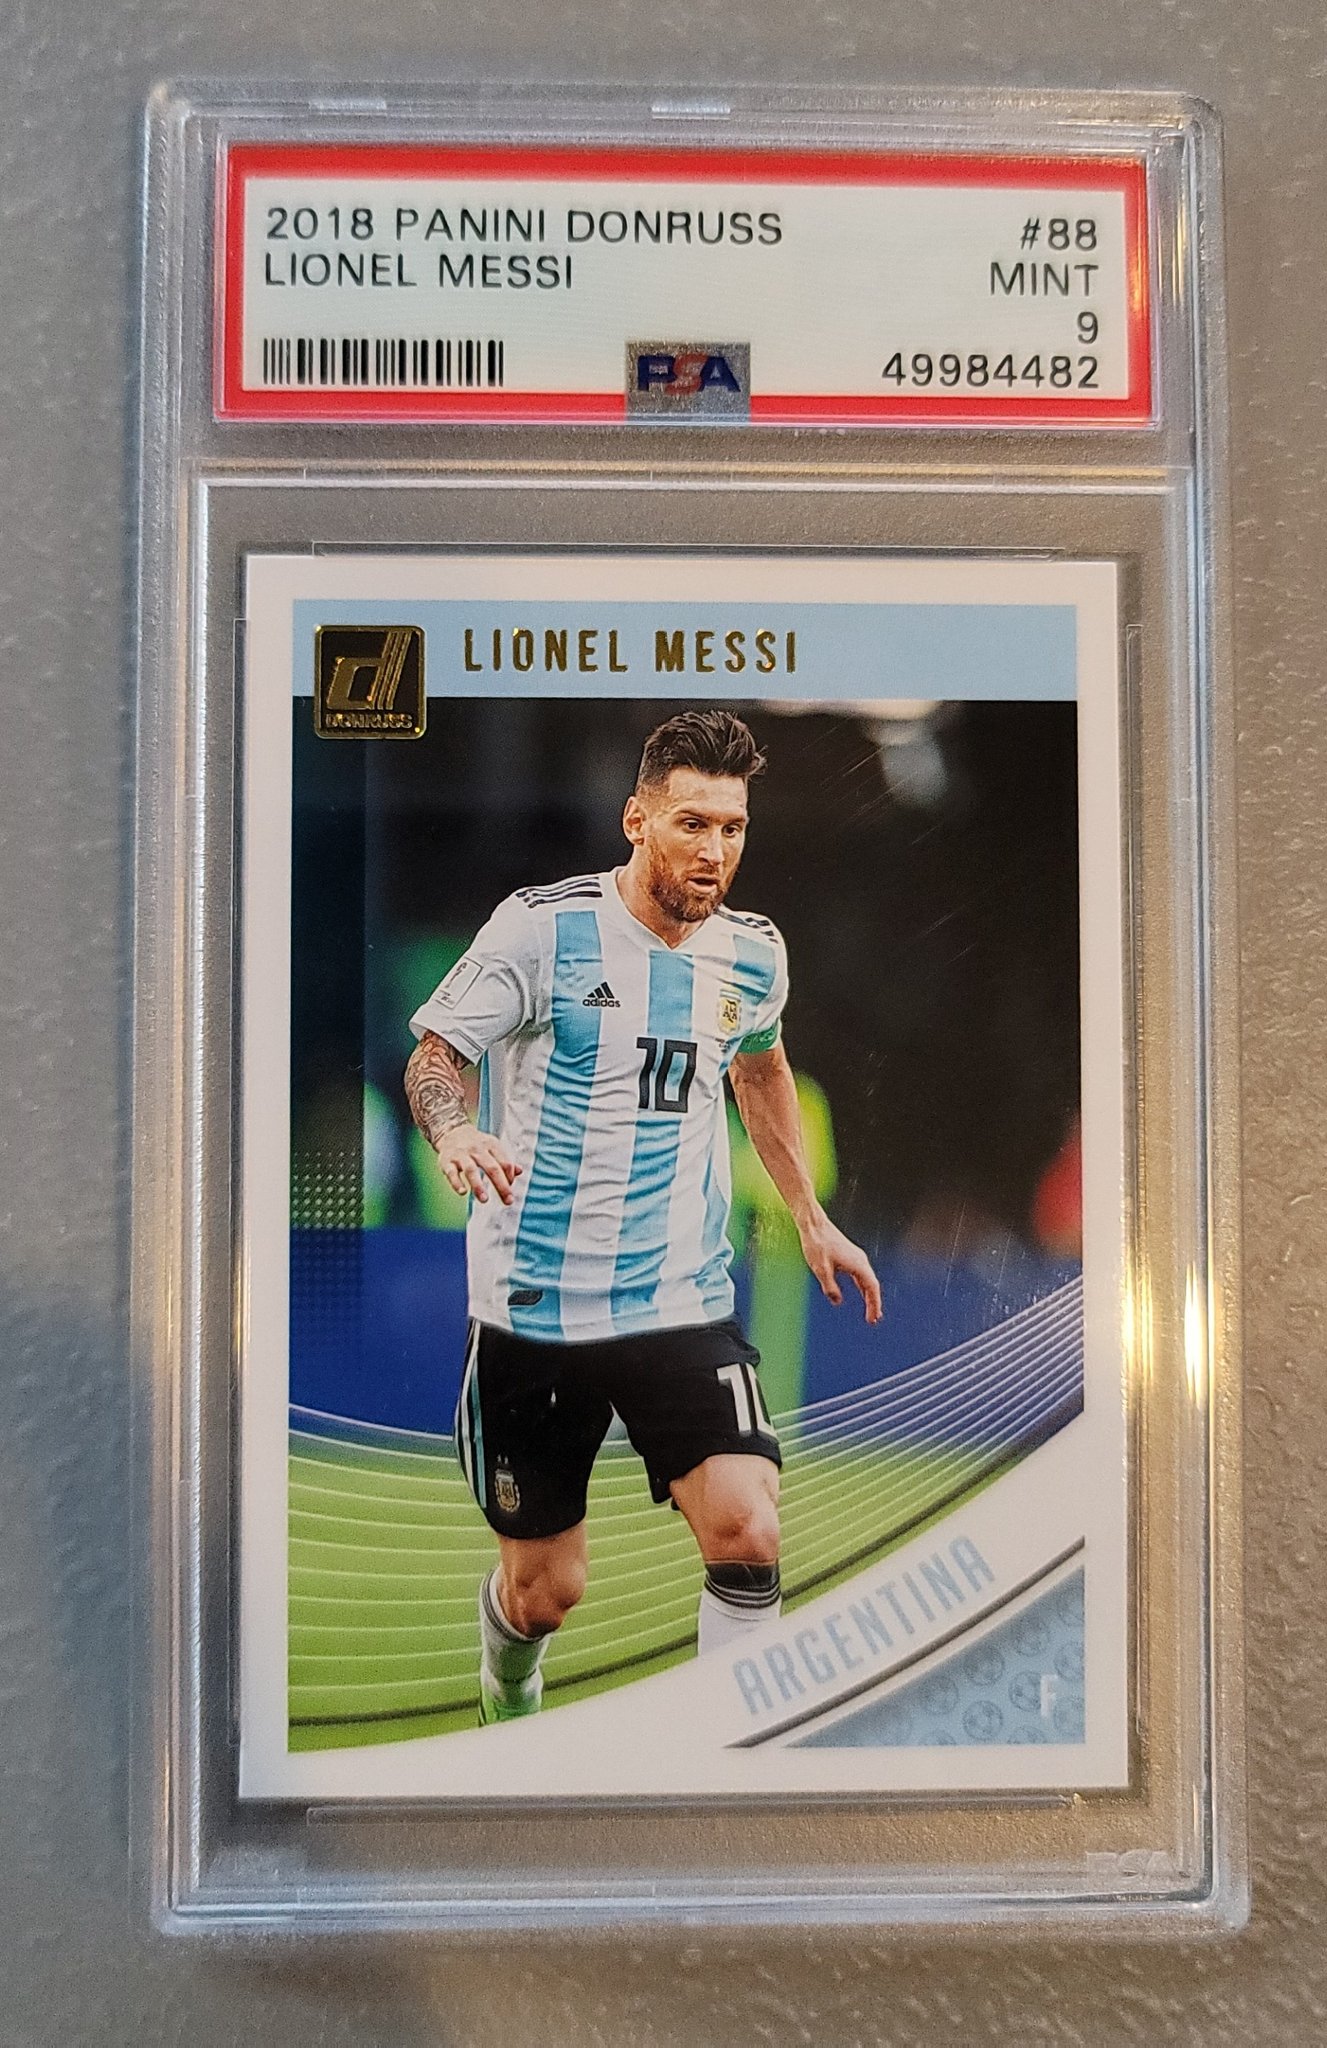 RARE Topps Crystal Lionel Messi Star Striker Champions League Card 2018/19 